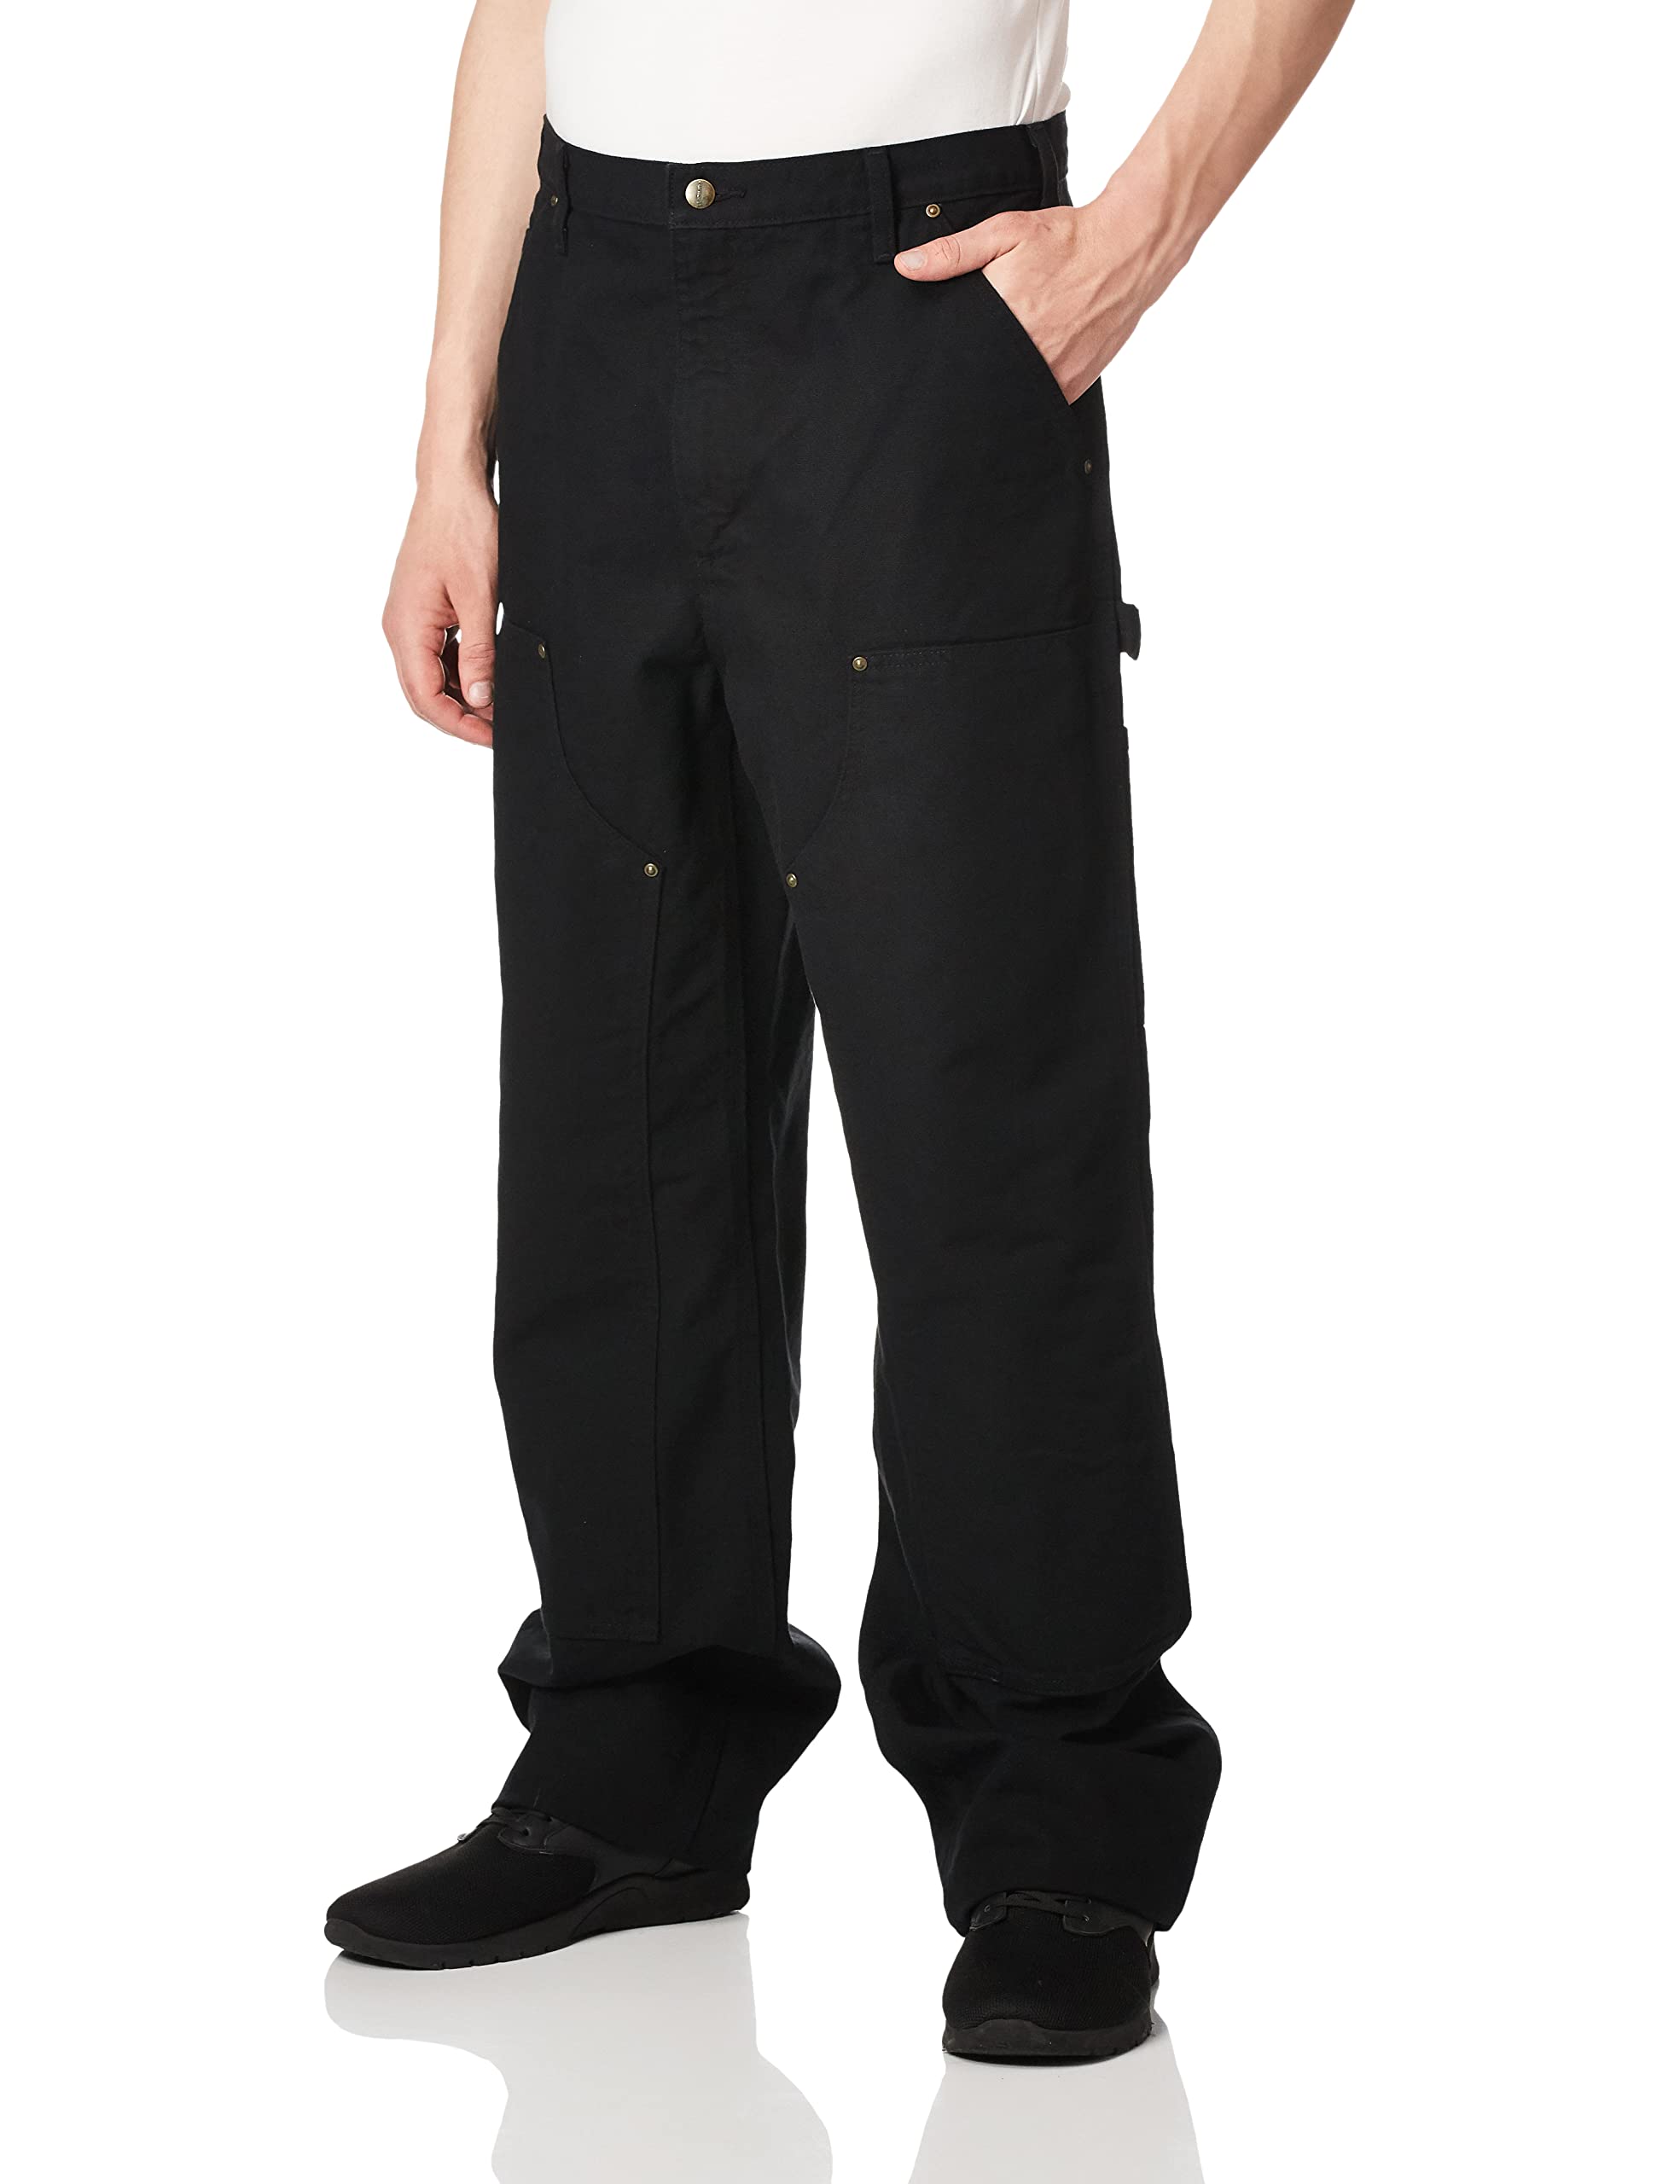 Carhartt Men's Loose Fit Washed Duck Double-Front Utility Work Pant